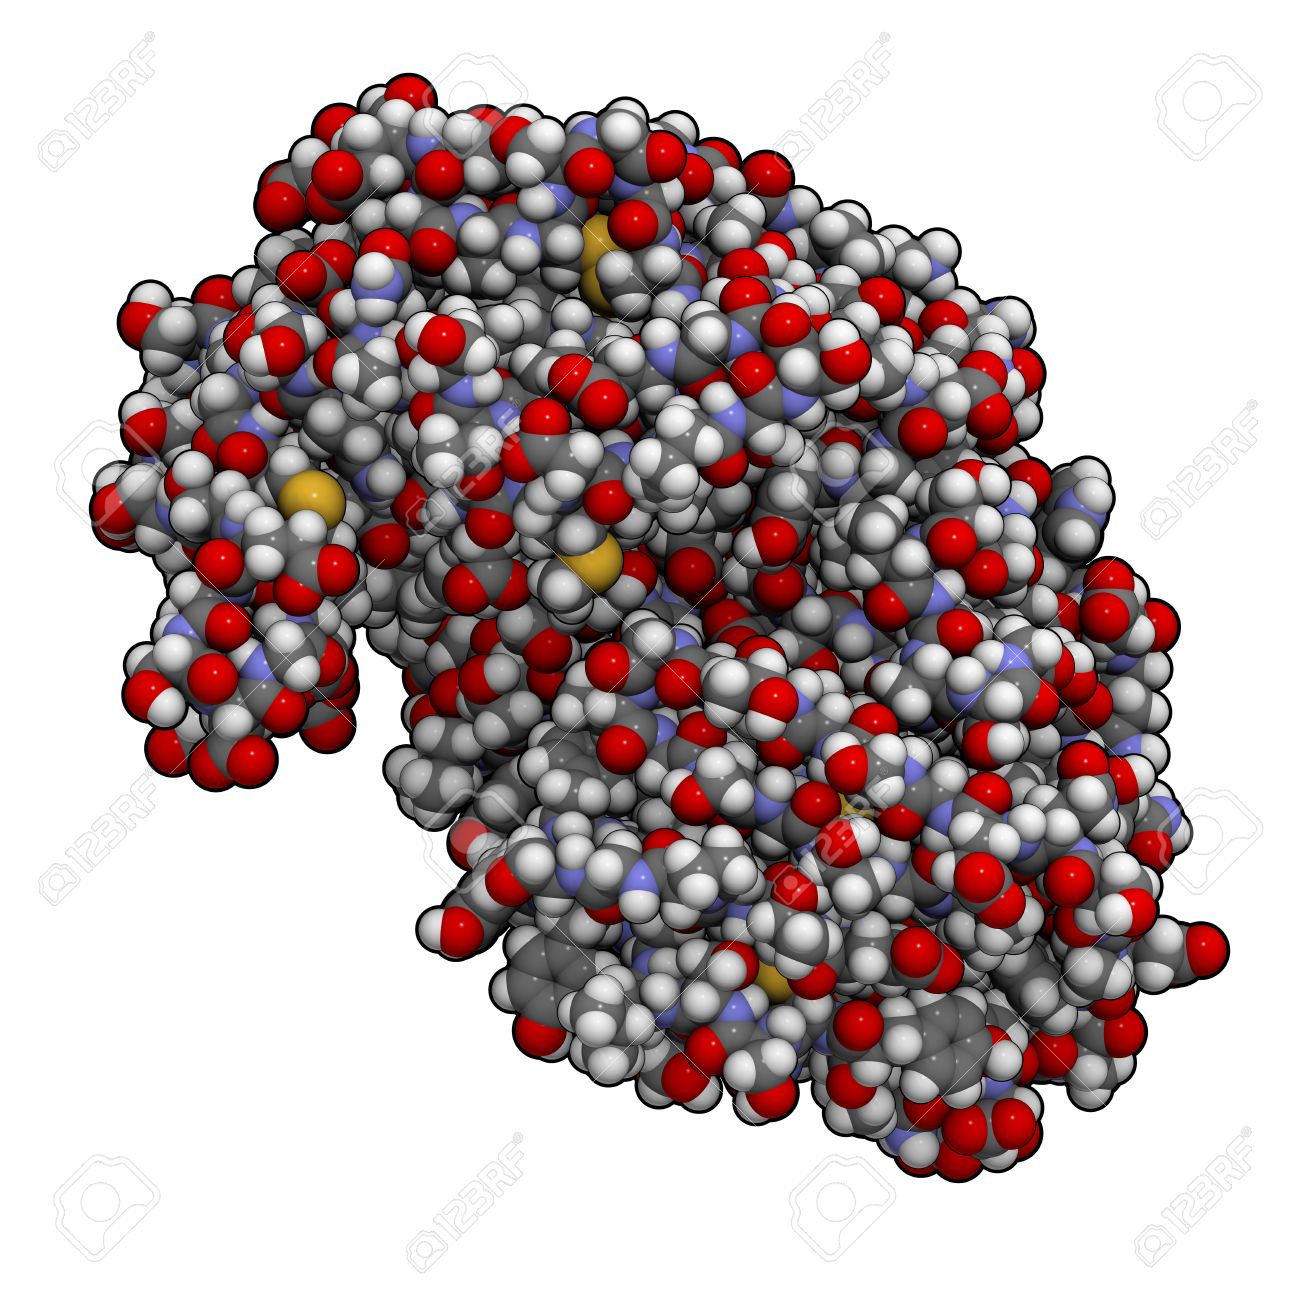 (http://previews.123rf.com/images/molekuul/molekuul1212/molekuul121200149/16647850-Chemical-structure-of-a-pepsin-enzyme-molecule-Pepsin-is-a-digestive-enzyme-found-in-the-stomach-whe-Stock-Photo.jpg)